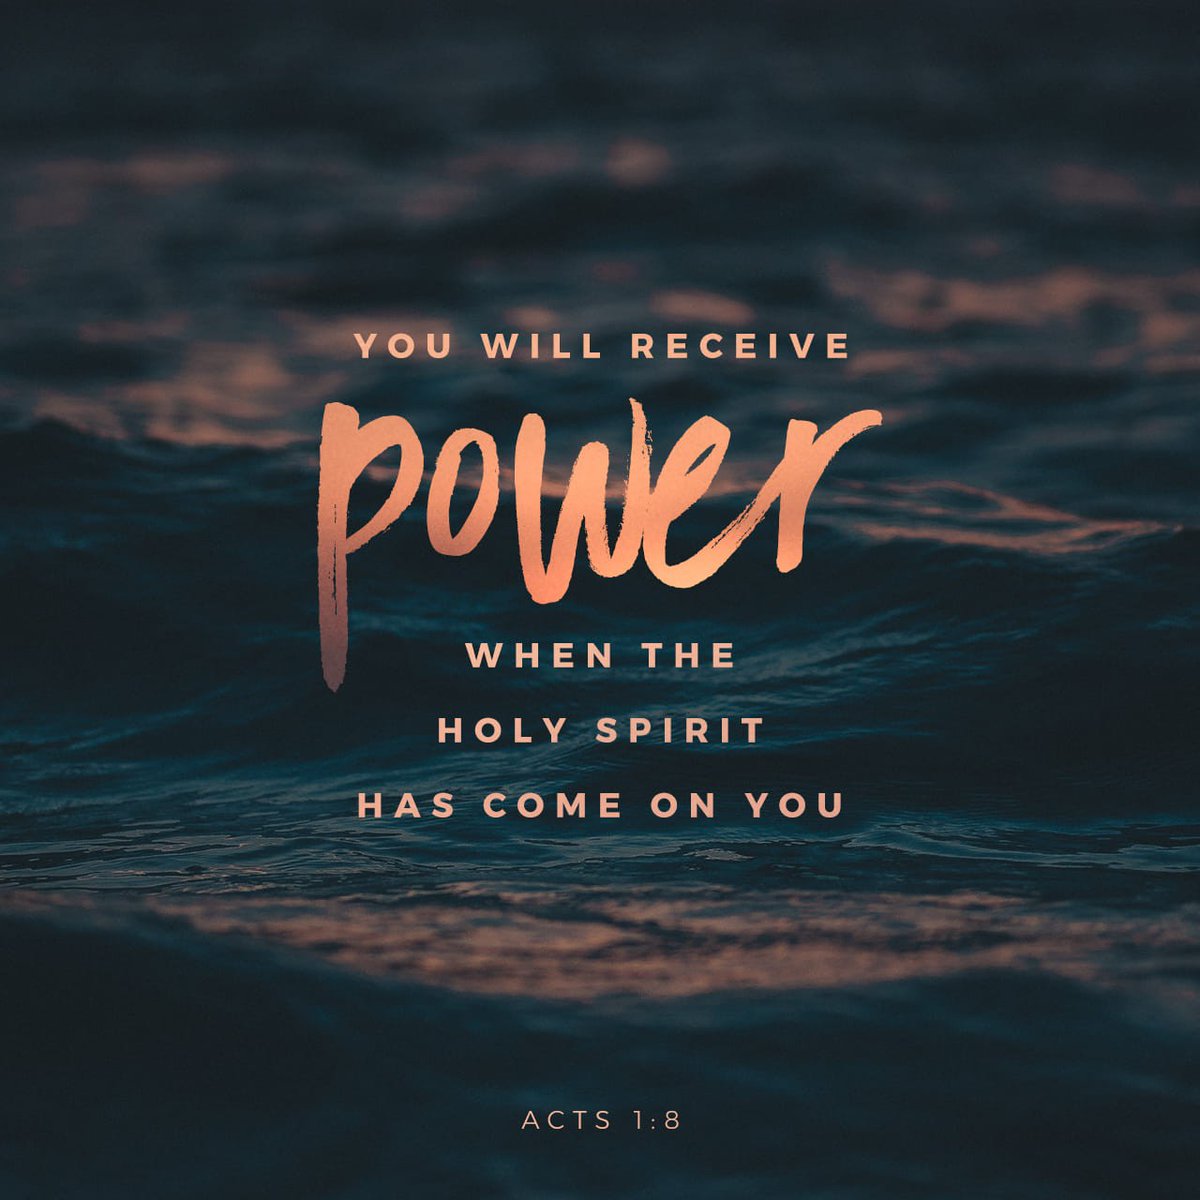 Acts 1:8 NASB
But you will receive power when the Holy Spirit has come upon you; and you shall be My witnesses both in Jerusalem, and in all Judea and Samaria, and even to the remotest part of the earth.

#dailybread #dailyverse #scripture #bibleverse #bible #jesus